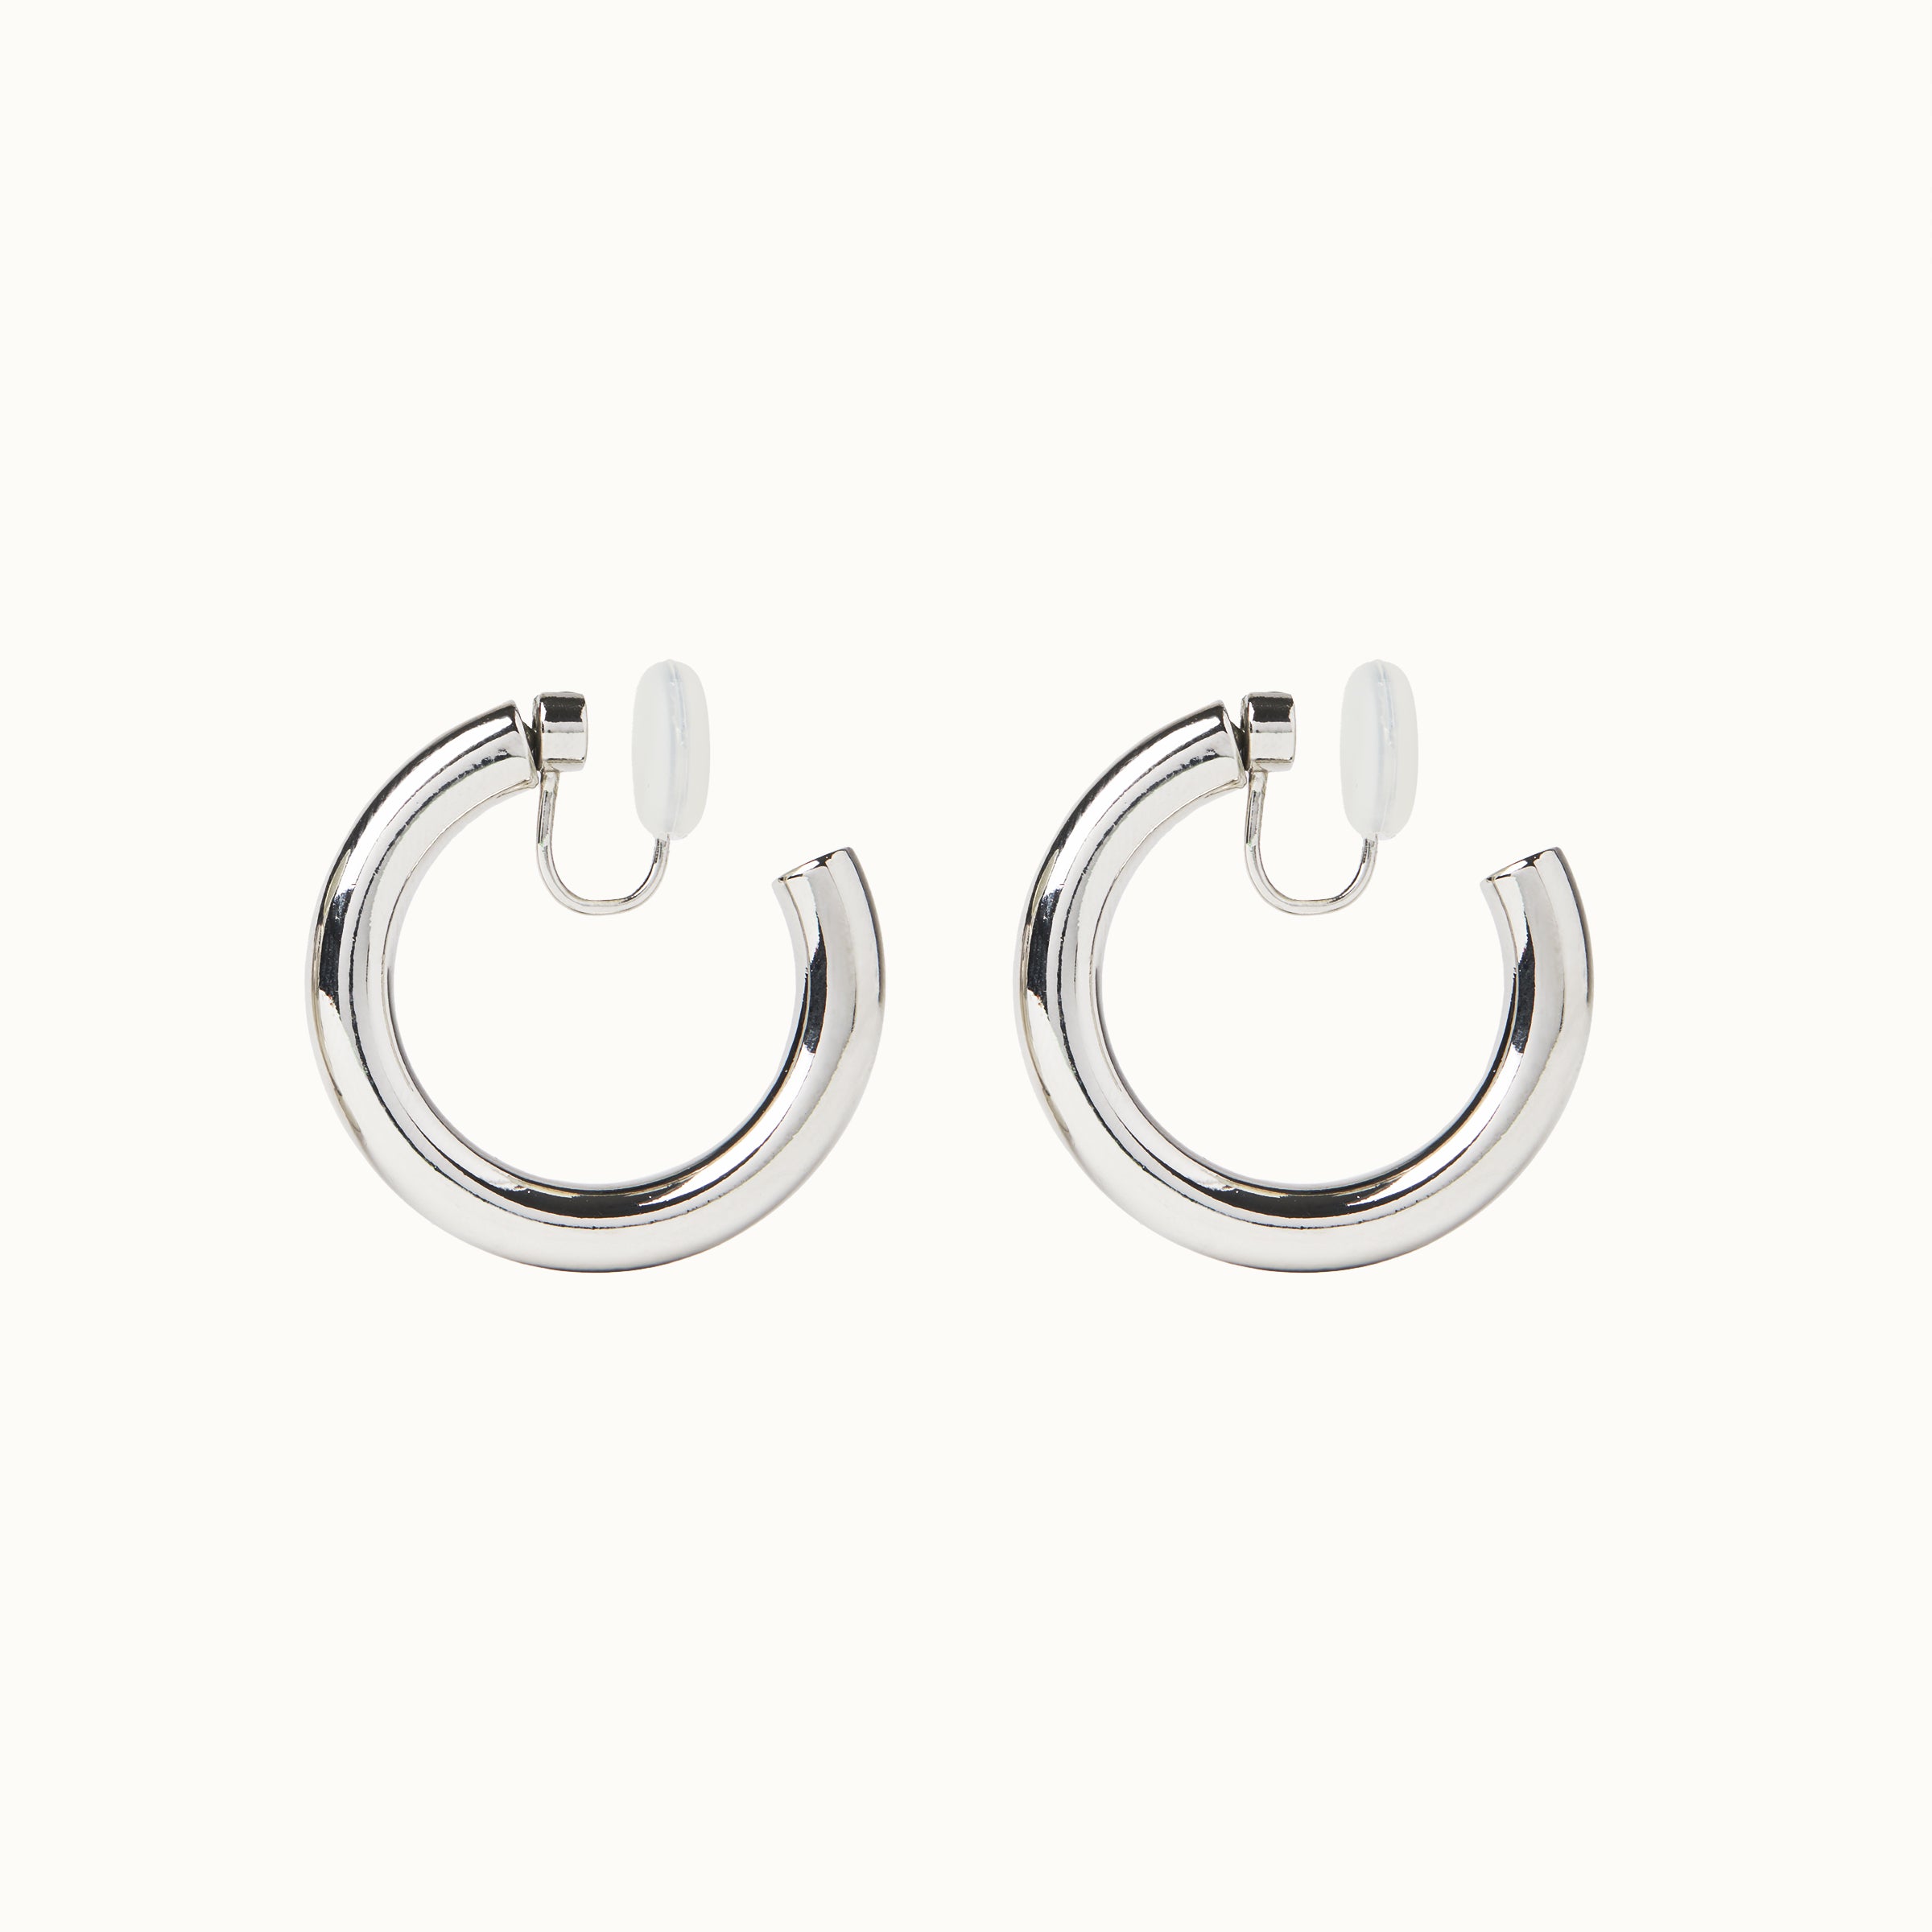 Image of the Allie Hoop Clip On Earrings in Silver, which are perfect for all ear types. The Mosquito Coil Clip-On Closure is suitable for Thick/Large, Sensitive, Small/Thin, Stretched/Healing, and Keloid Prone Ears. Made of a silver tone copper alloy, each purchase includes one pair.